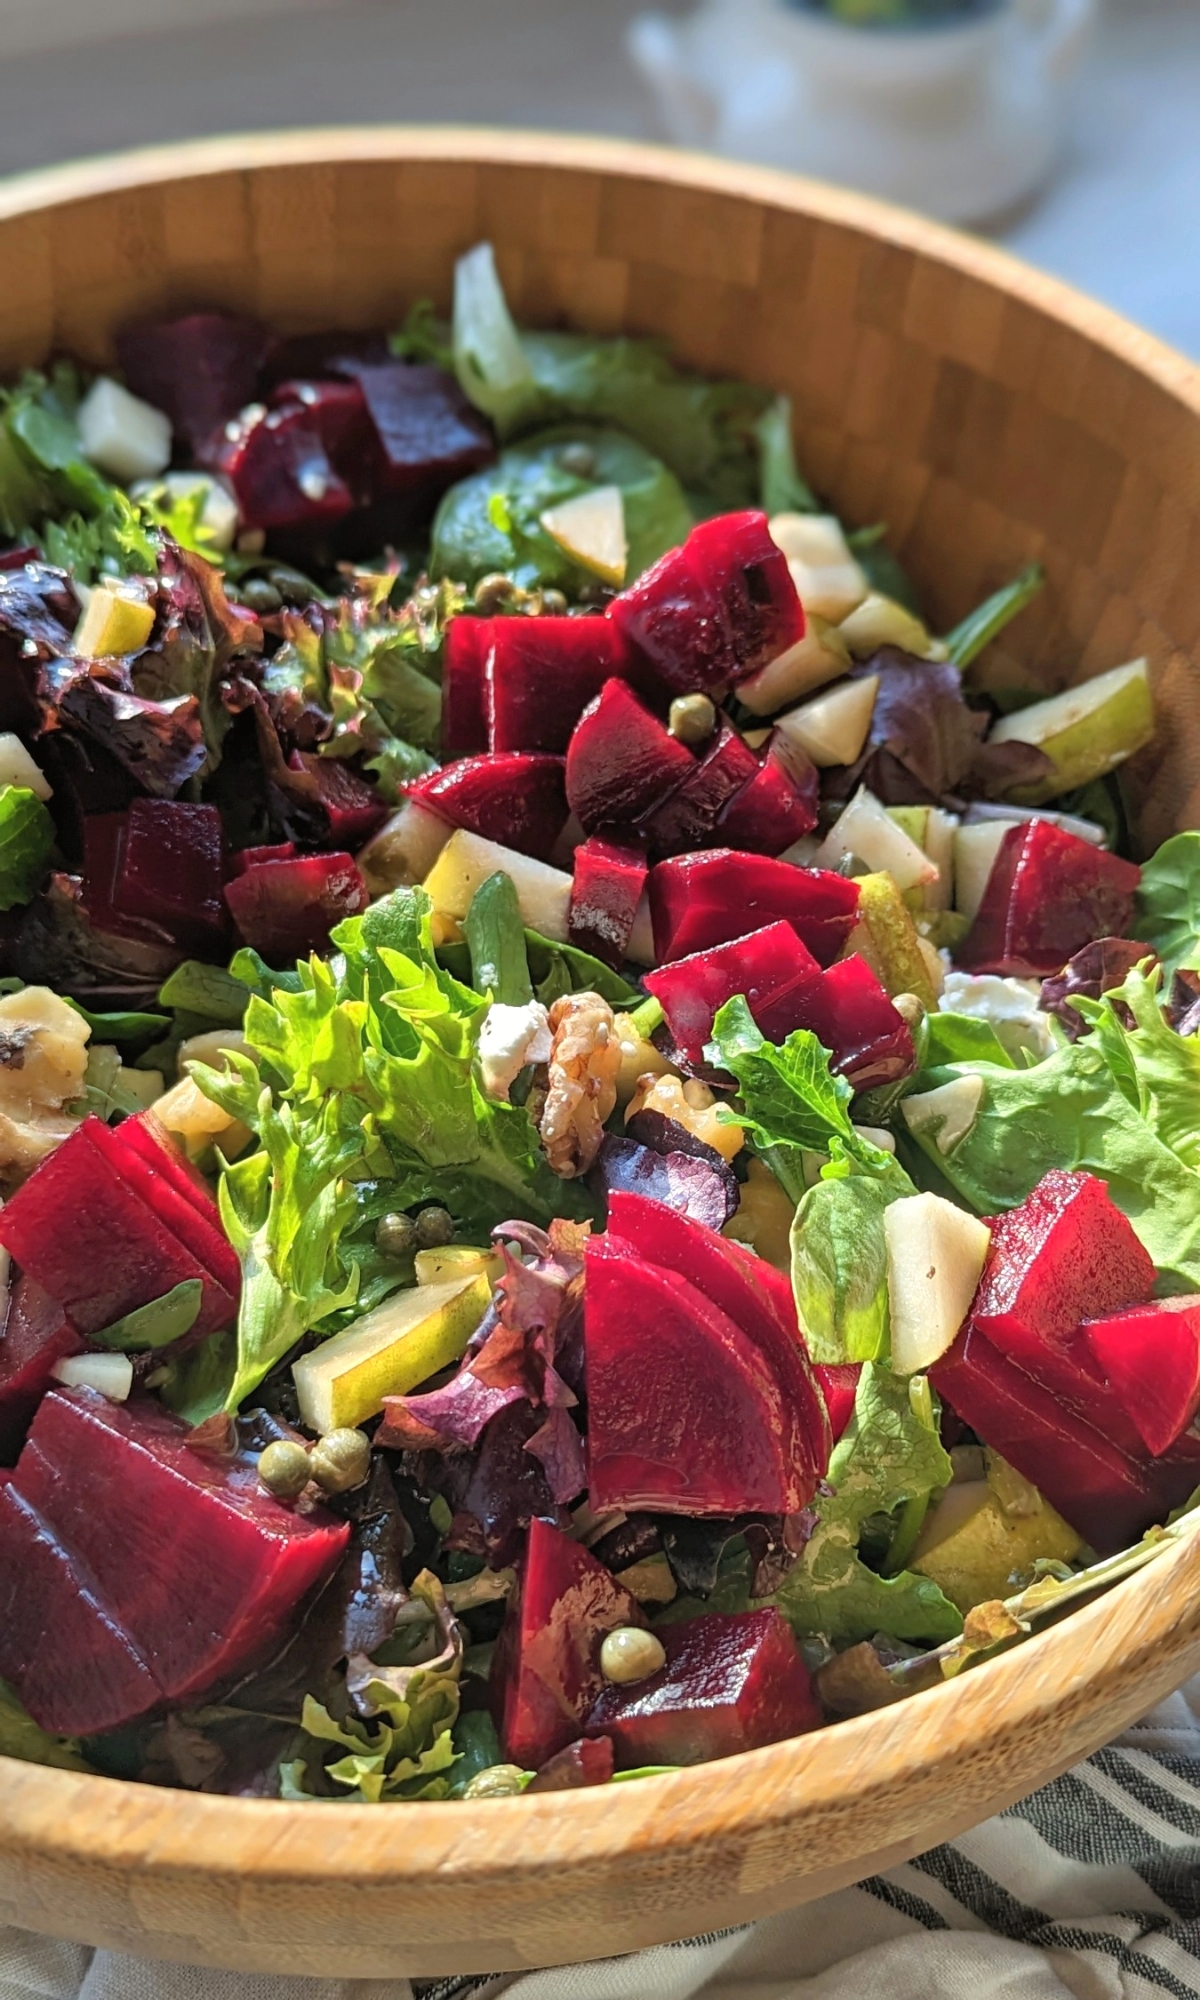 salad with beets and pears easy beet salad with greens and nuts and fruit easy dressing for beets.